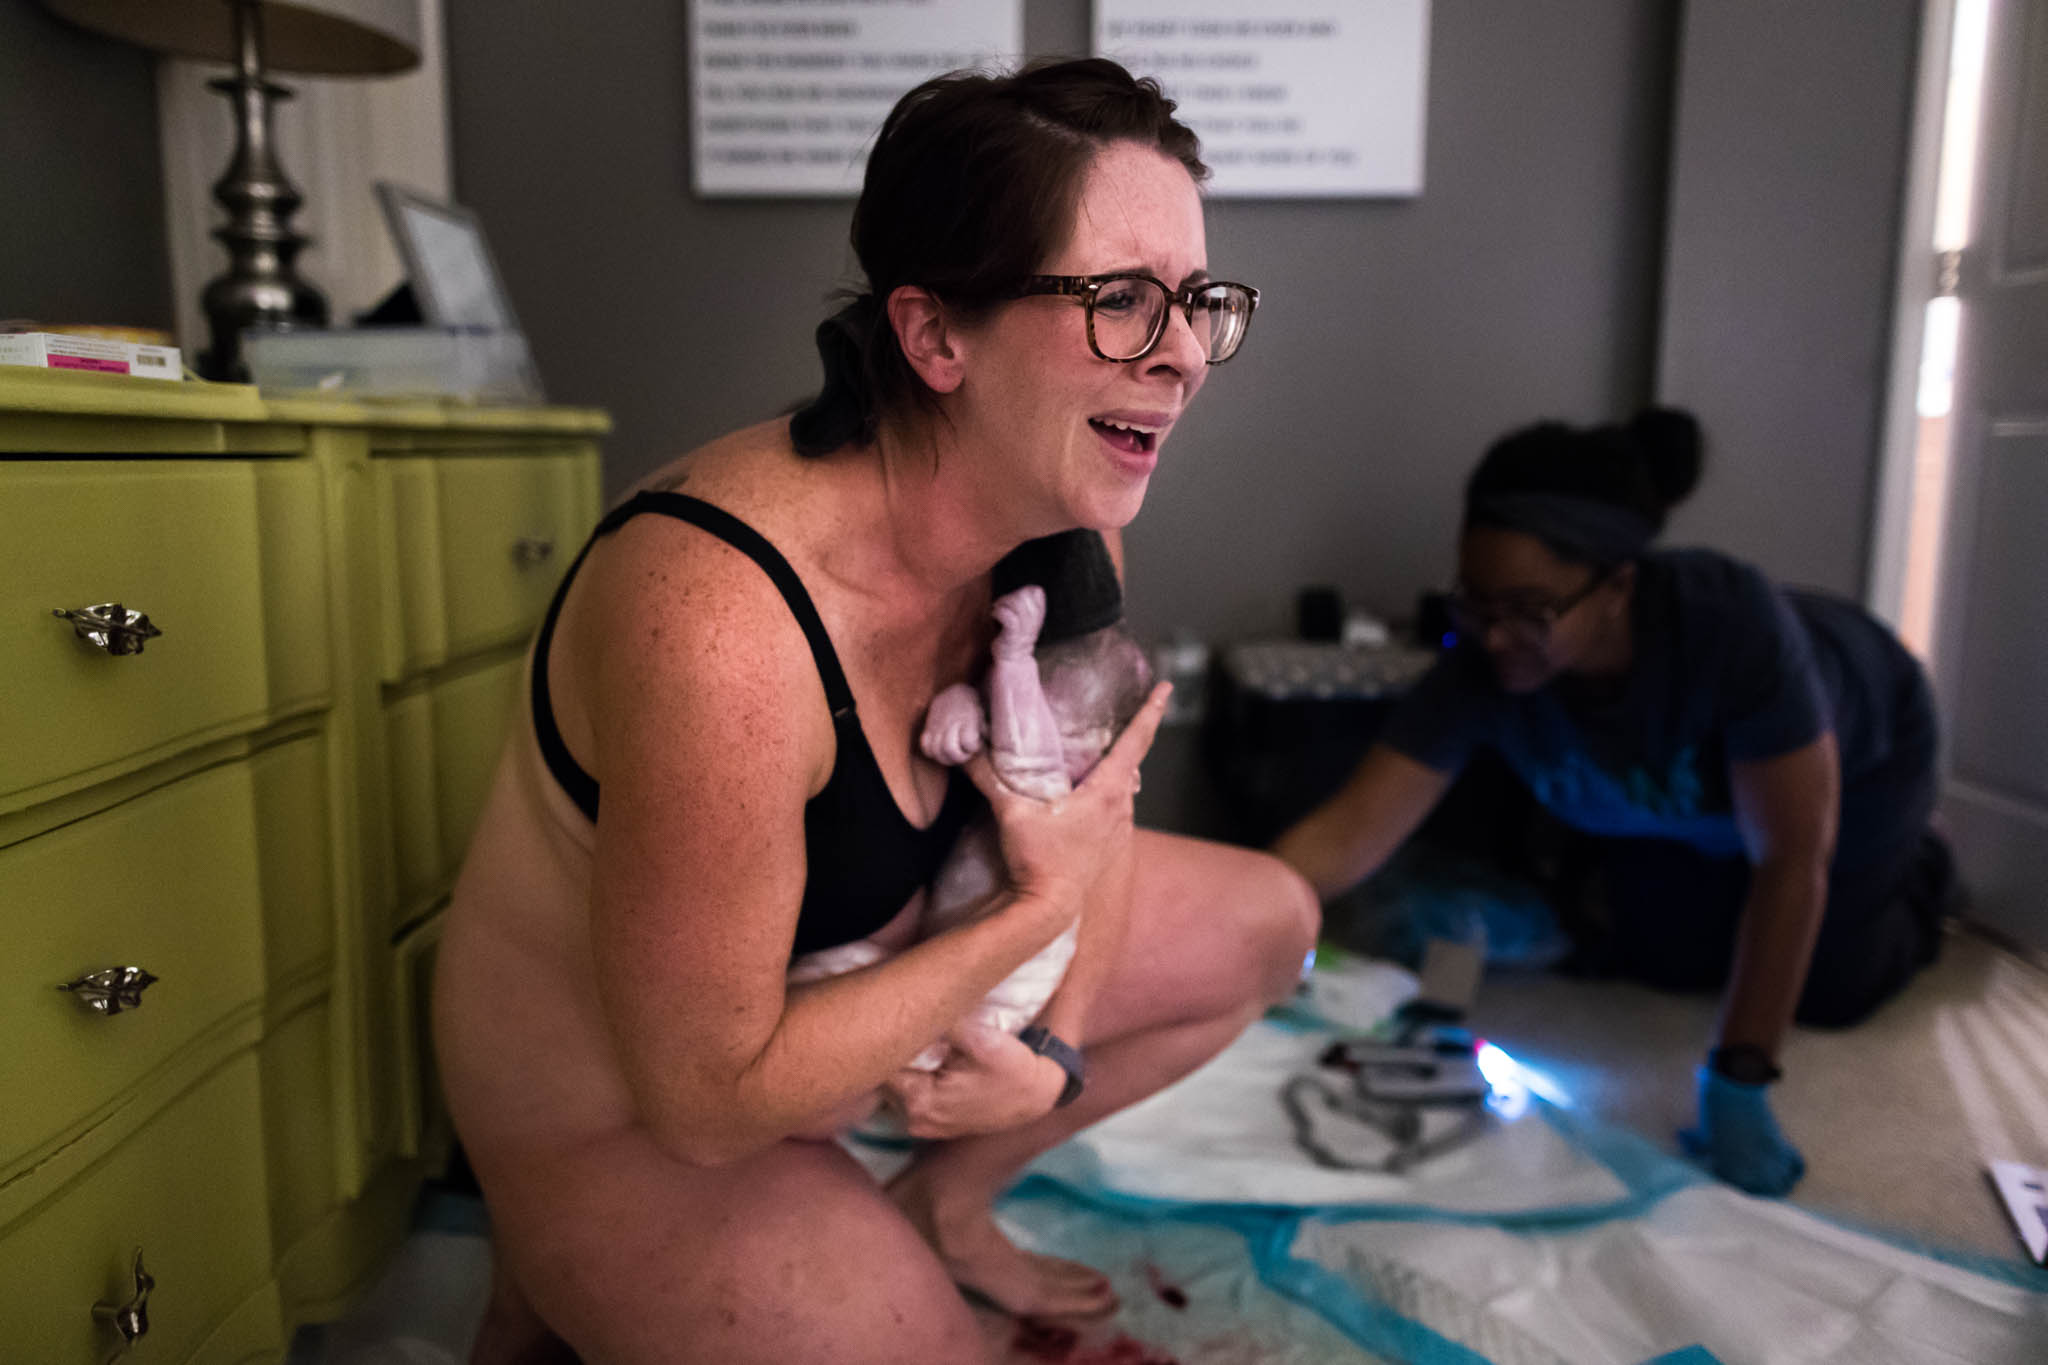 Denton Birth Photographer Lawren Rose Photography captures the moment a Mom is holding her baby for the first time, with a loving and surprise look on her face